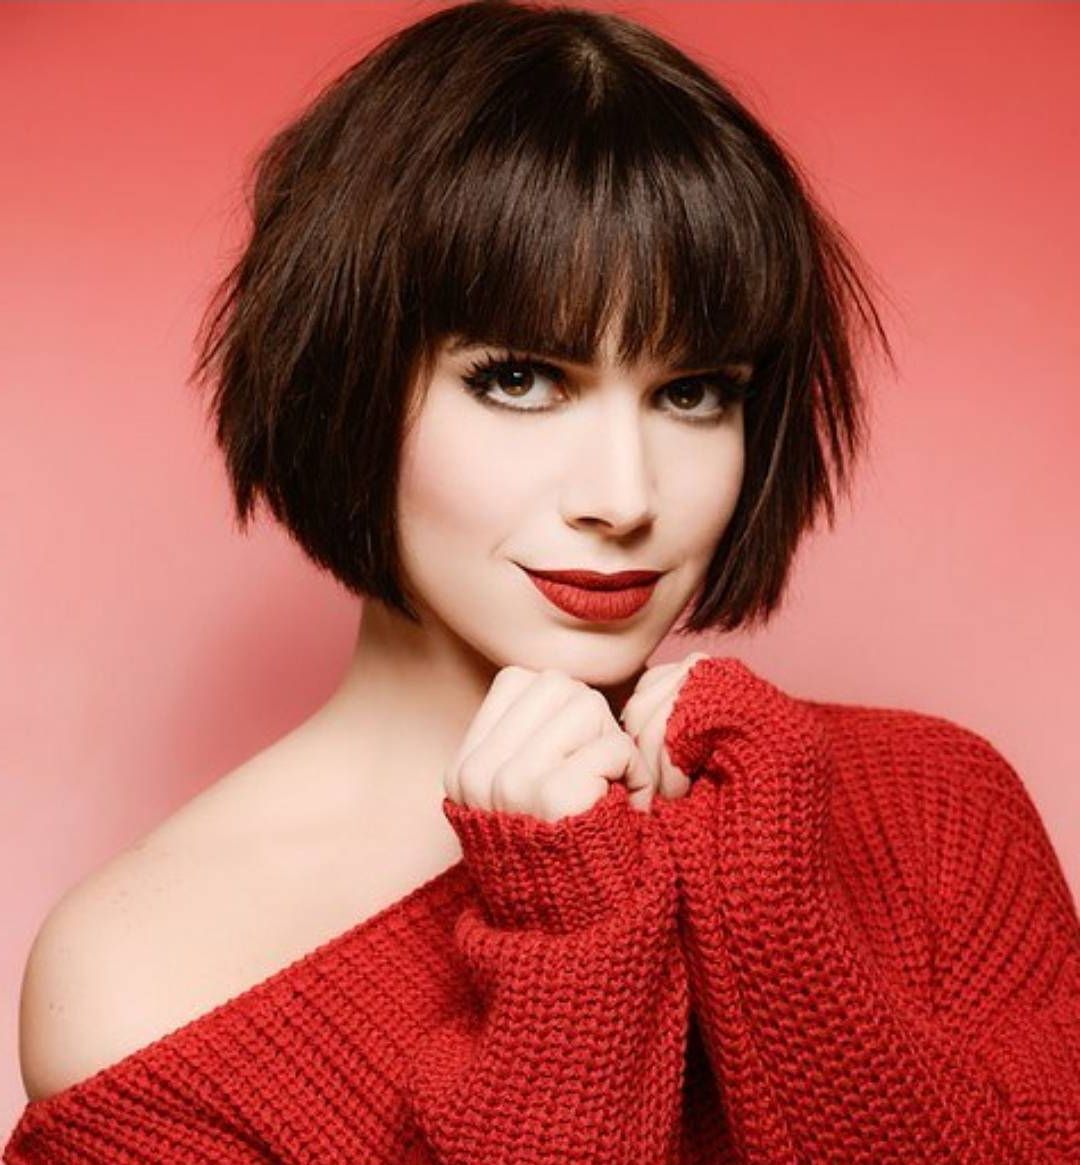 10 Chic Short Bob Haircuts That Balance Your Face Shape! – Short Intended For Razored Pixie Bob Haircuts With Irregular Layers (View 15 of 20)